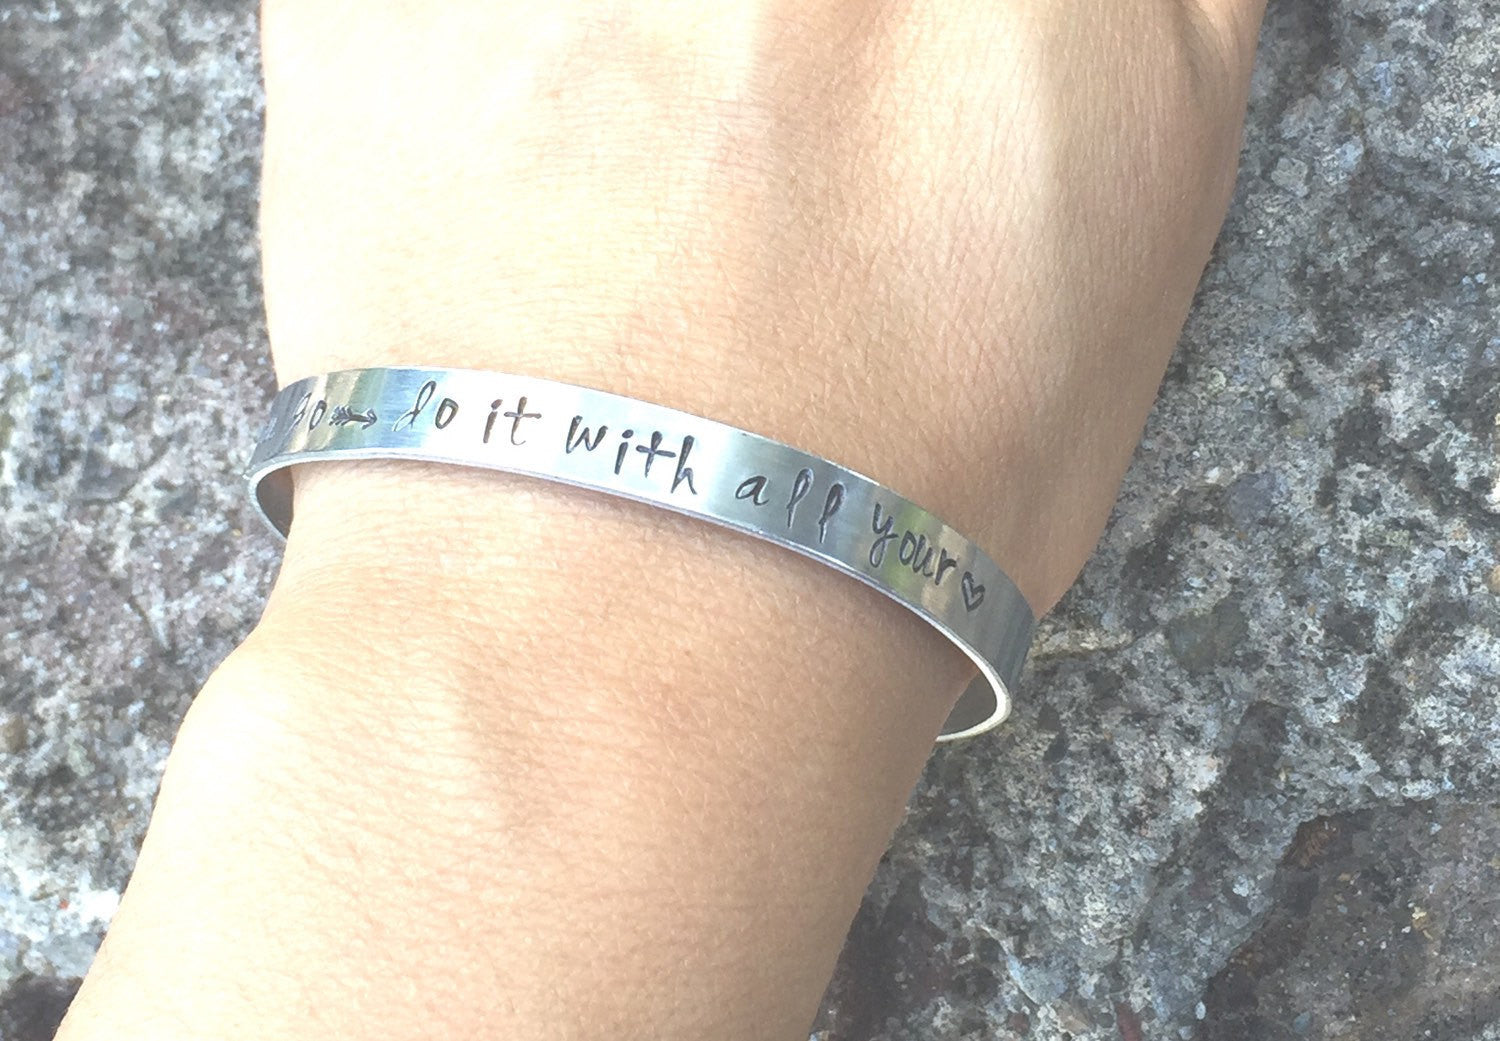 Graduation Gifts, Wherever you go do it with all your heart Bracelet - Natashaaloha, jewelry, bracelets, necklace, keychains, fishing lures, gifts for men, charms, personalized, 